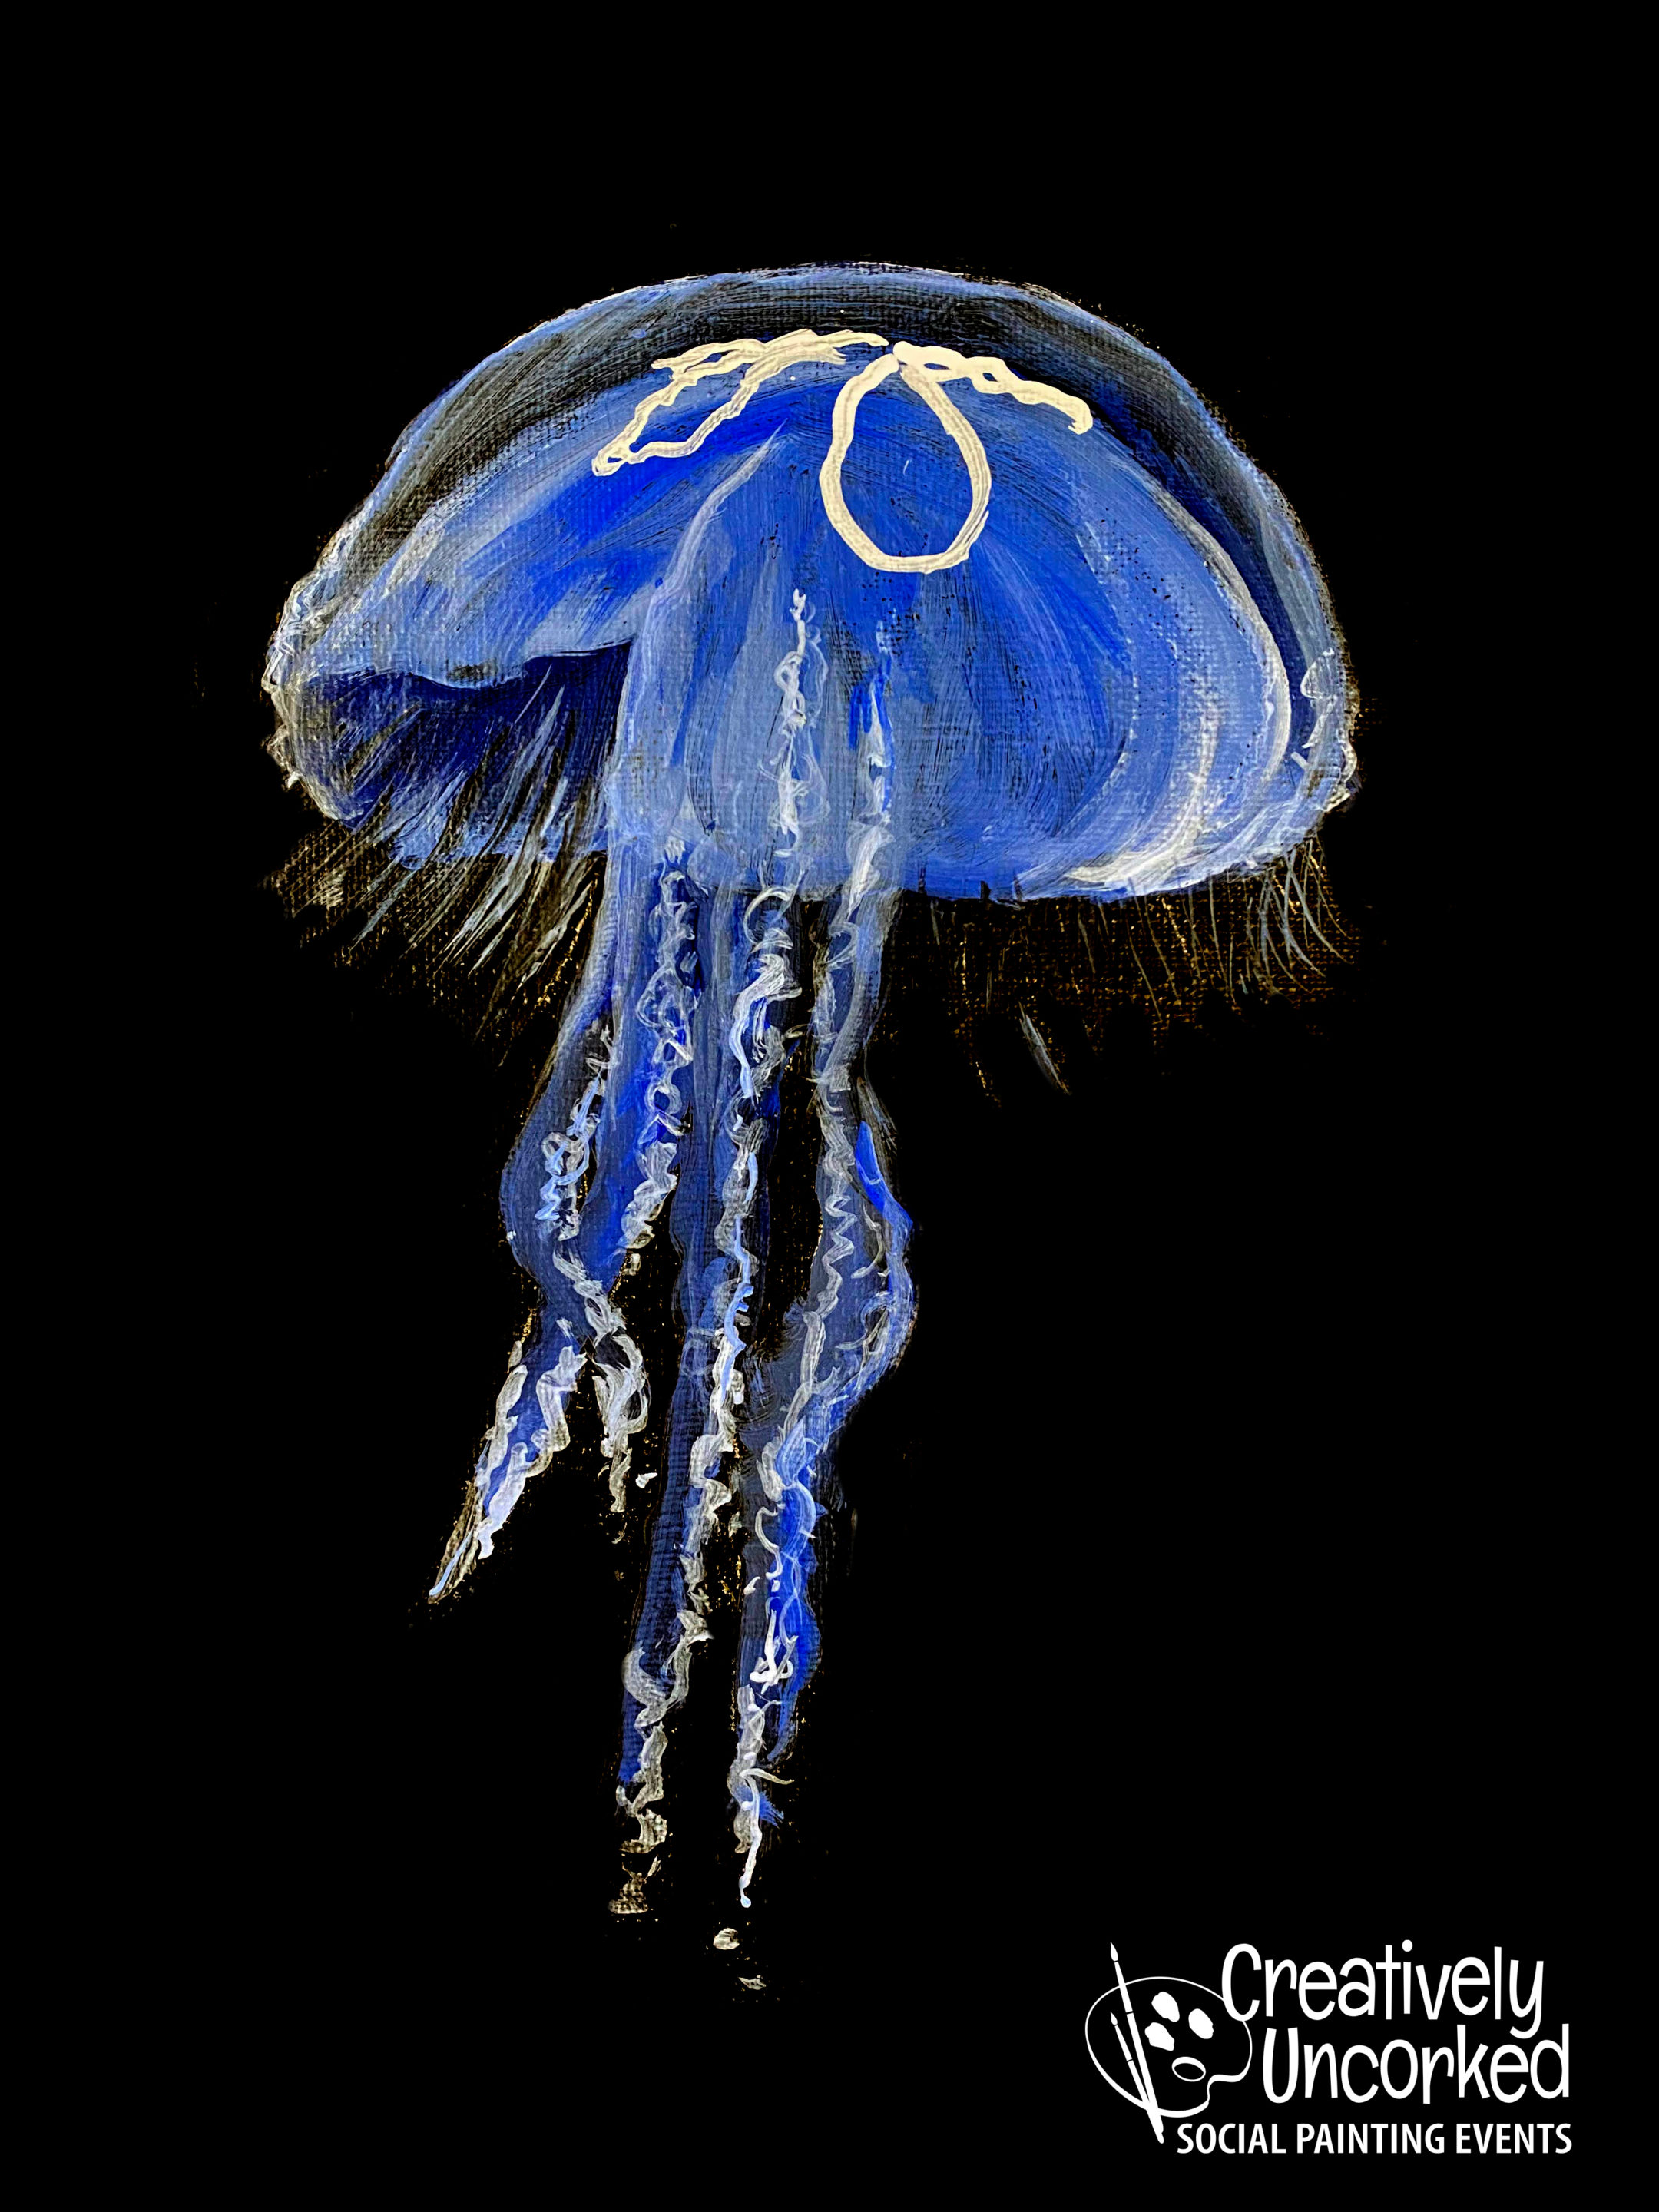 Box Jellyfish from Creatively Uncorked http://creativelyuncorked.com/